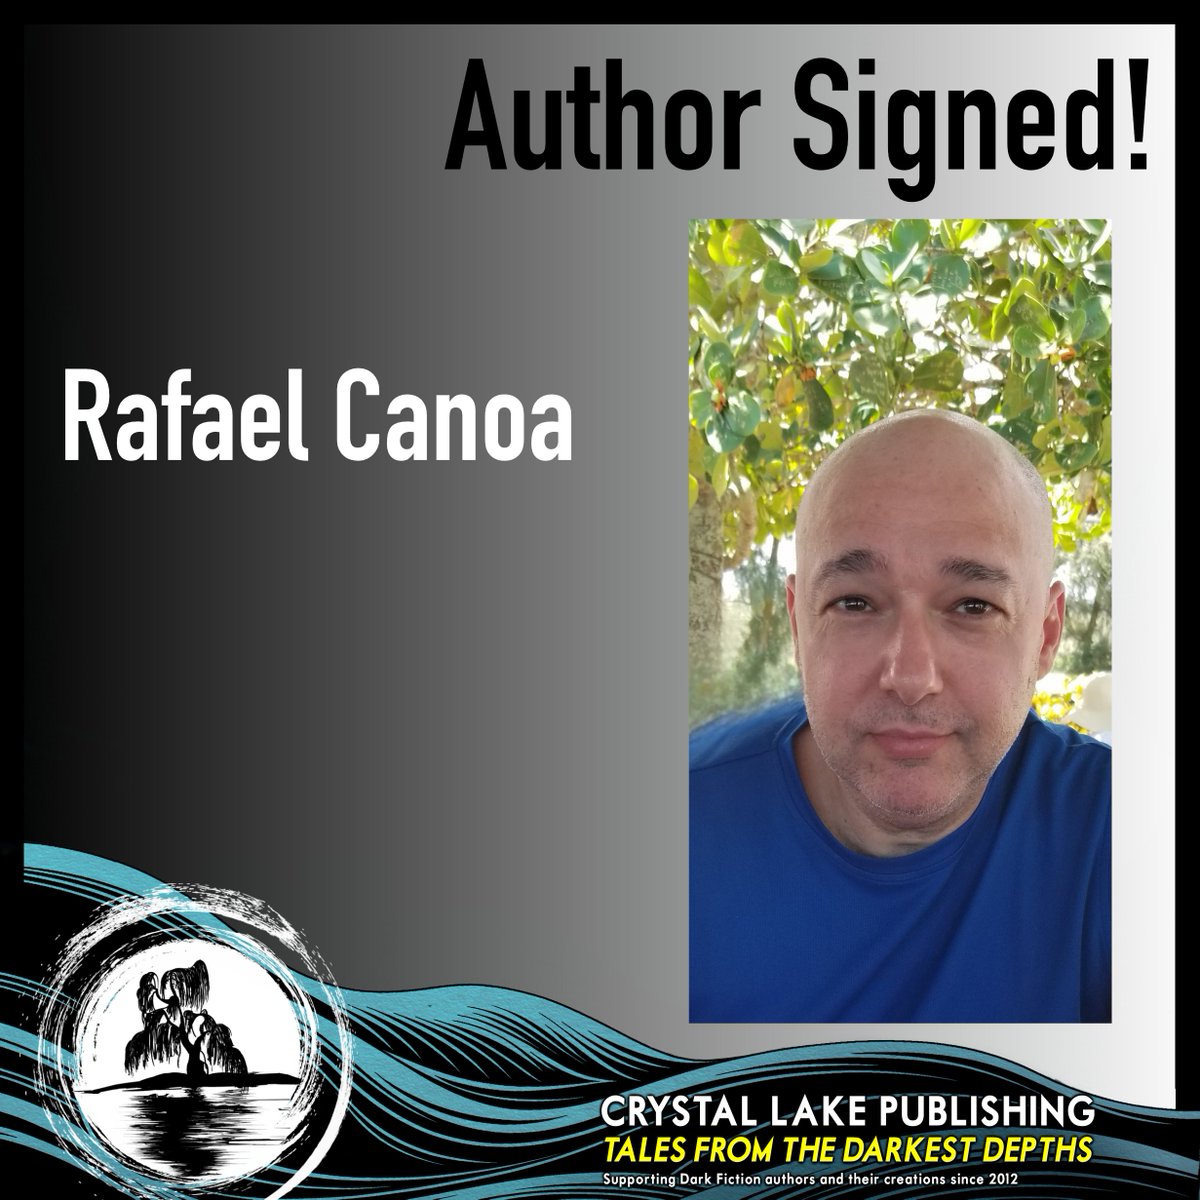 New Author Signed! Debut author, actually. At Crystal Lake we give every author an equal chance, and Rafael blew us away with a Fantasy novel. Rafael's book will be out mid-2025. #publishing #writerslife #fantasyauthors #writersoftwitter #epicfantasy